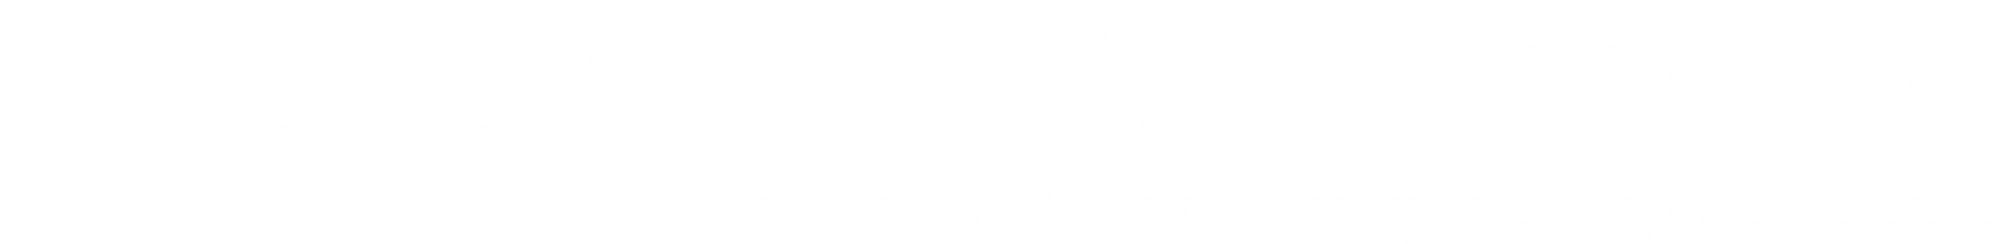 Logo of the Fu Foundation School of Engineering and Applied Science at Columbia University